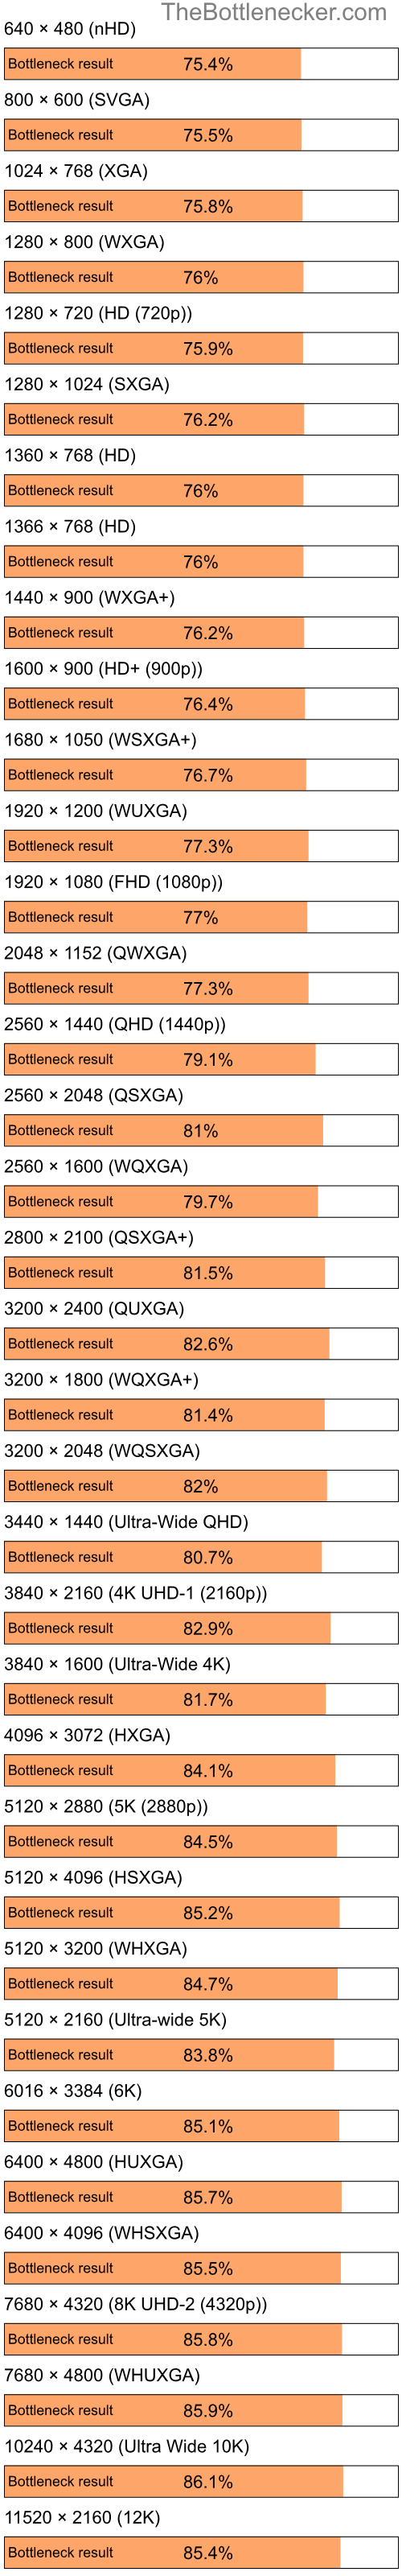 Bottleneck results by resolution for Intel Celeron M 420 and AMD Mobility Radeon HD 4225 in Graphic Card Intense Tasks